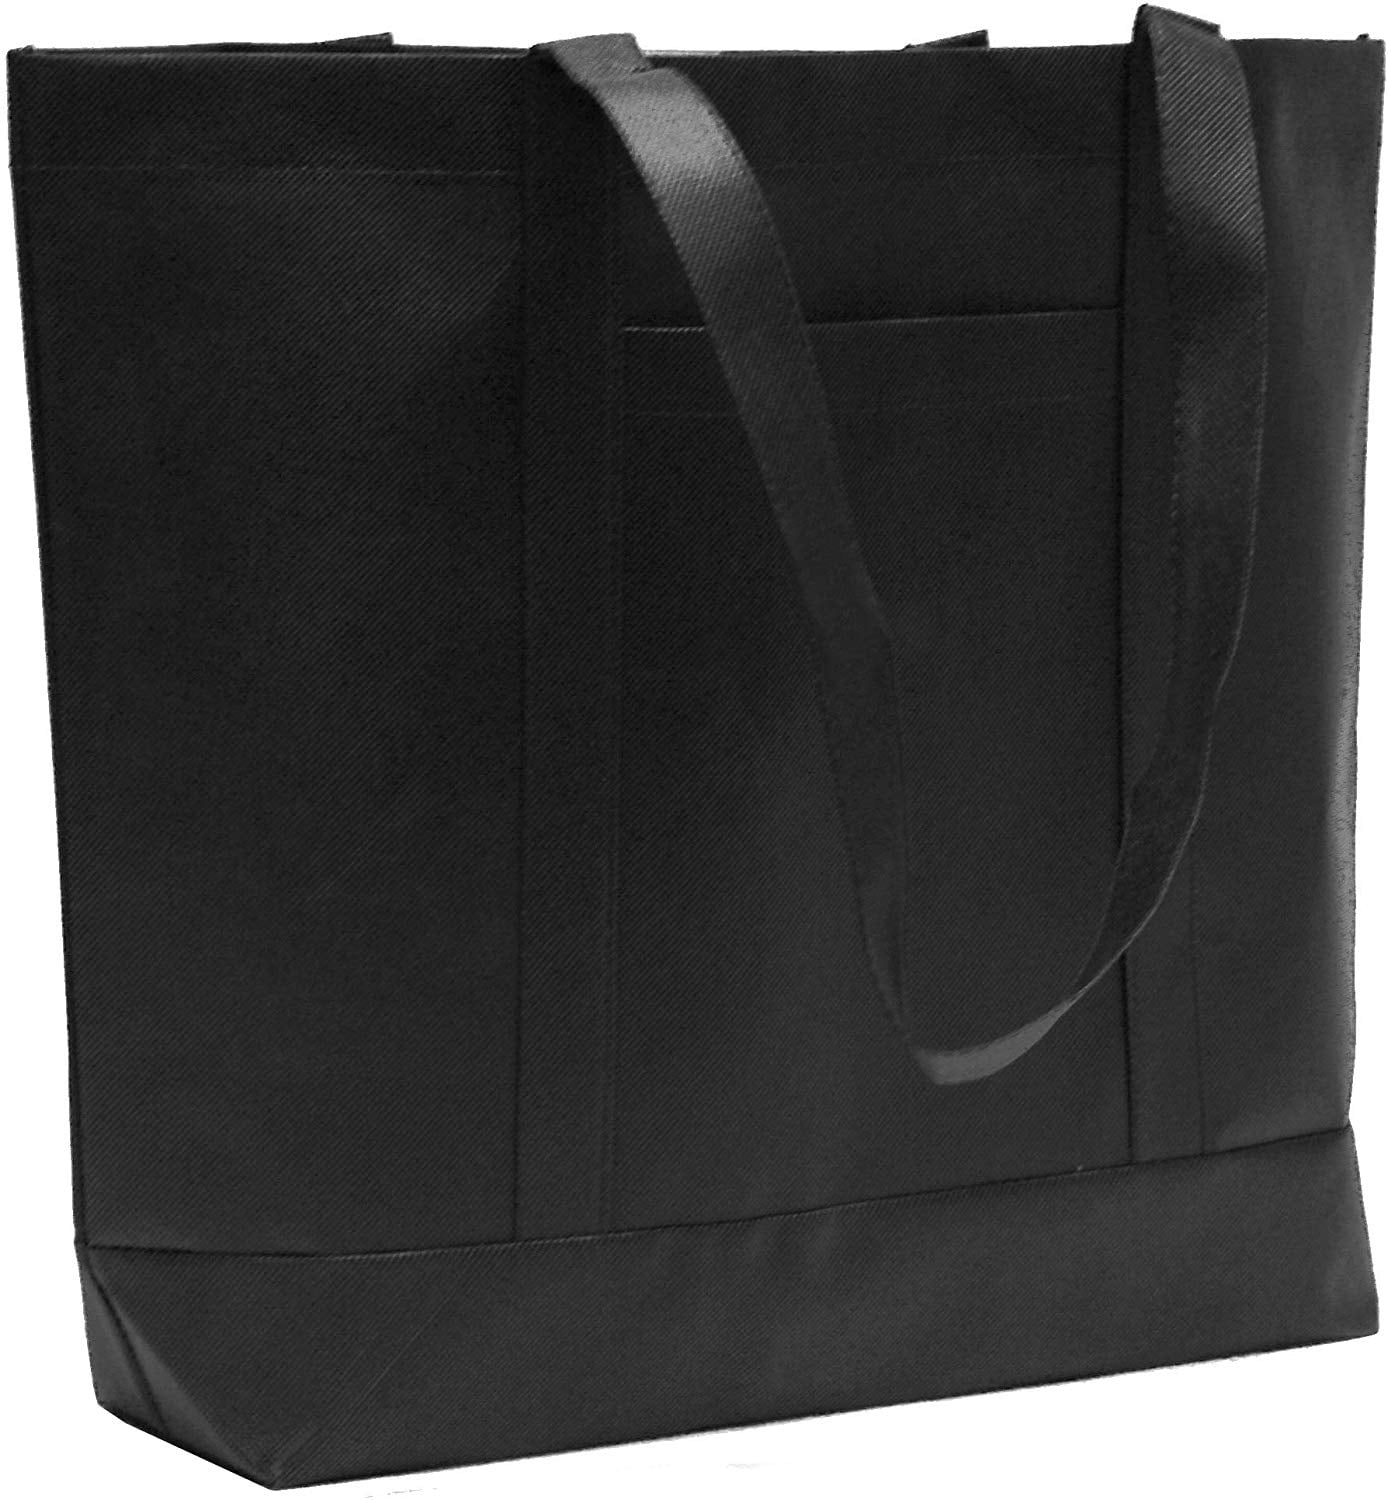 ATBAY Reusable Grocery Bags Heavy Duty Shopping Box Collapsible Extra Large F... 